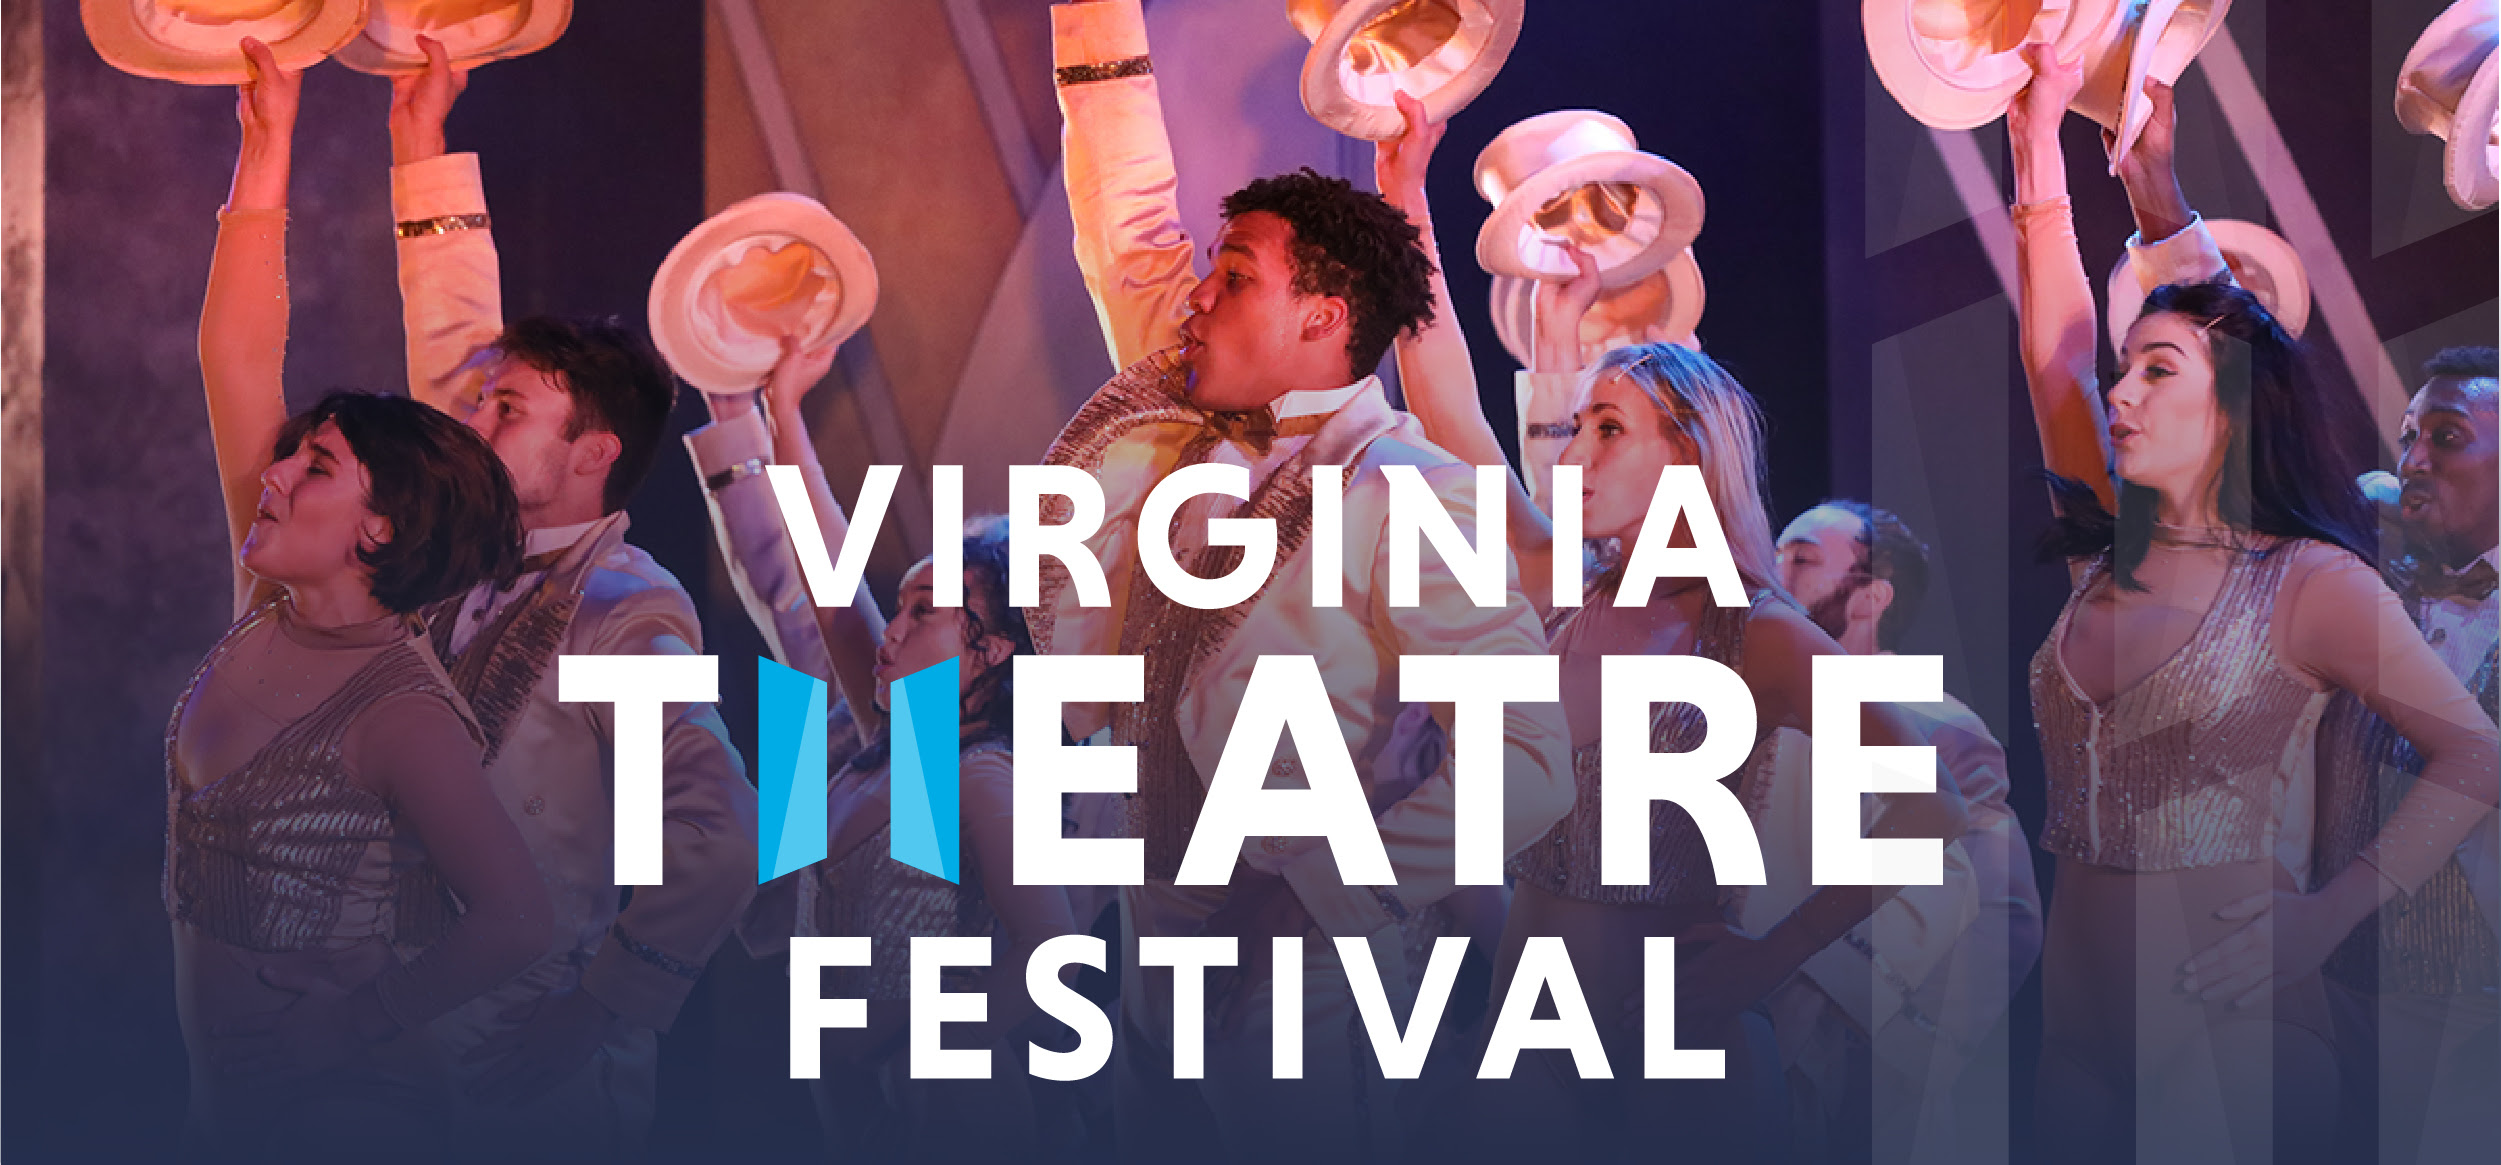 The Virginia Theatre Festival logo overlays a group of people raising their top hats in a dance.